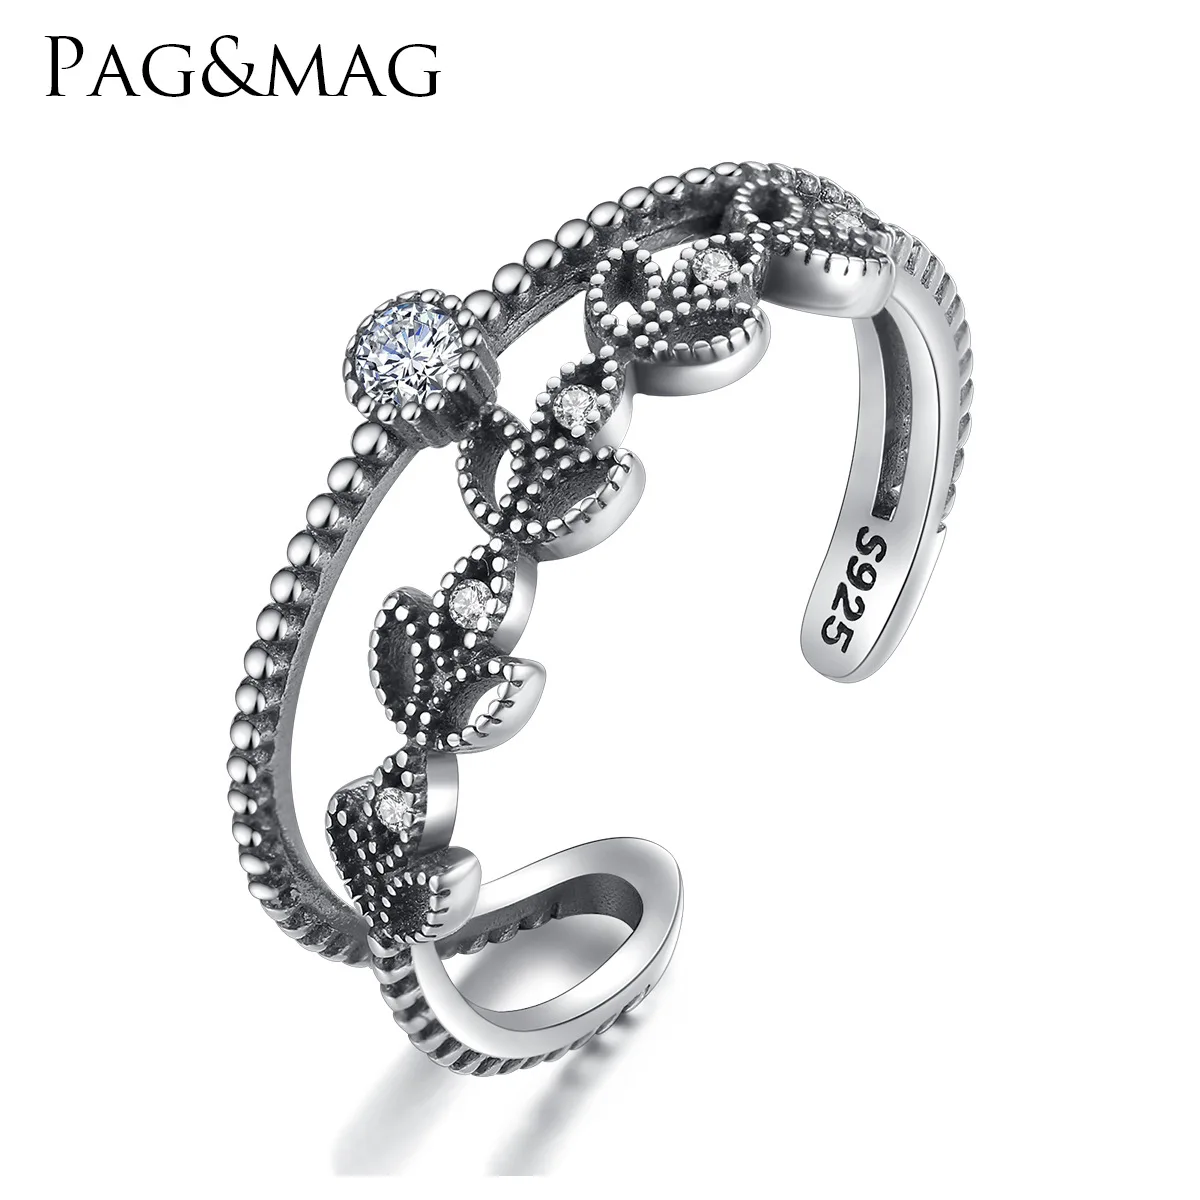 

PAG-MAG S925 Thai Silver Ring Women's Fashion Fresh Leaves-Shaped AAA-class zircon bracelet